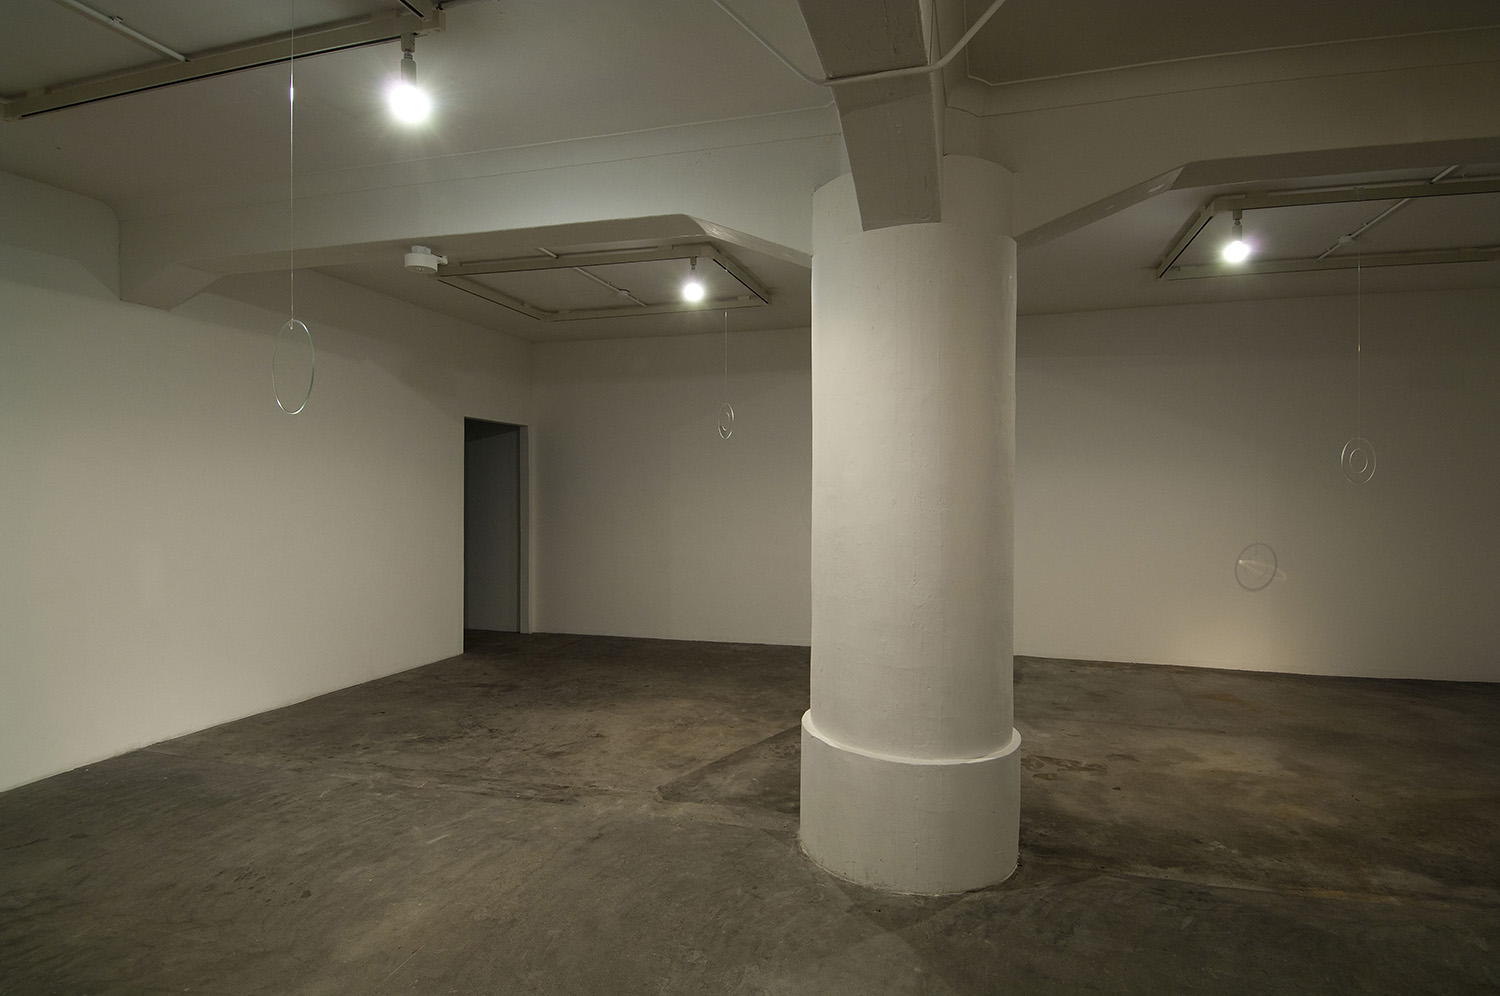 Installation View of one-man exhibition in 2009